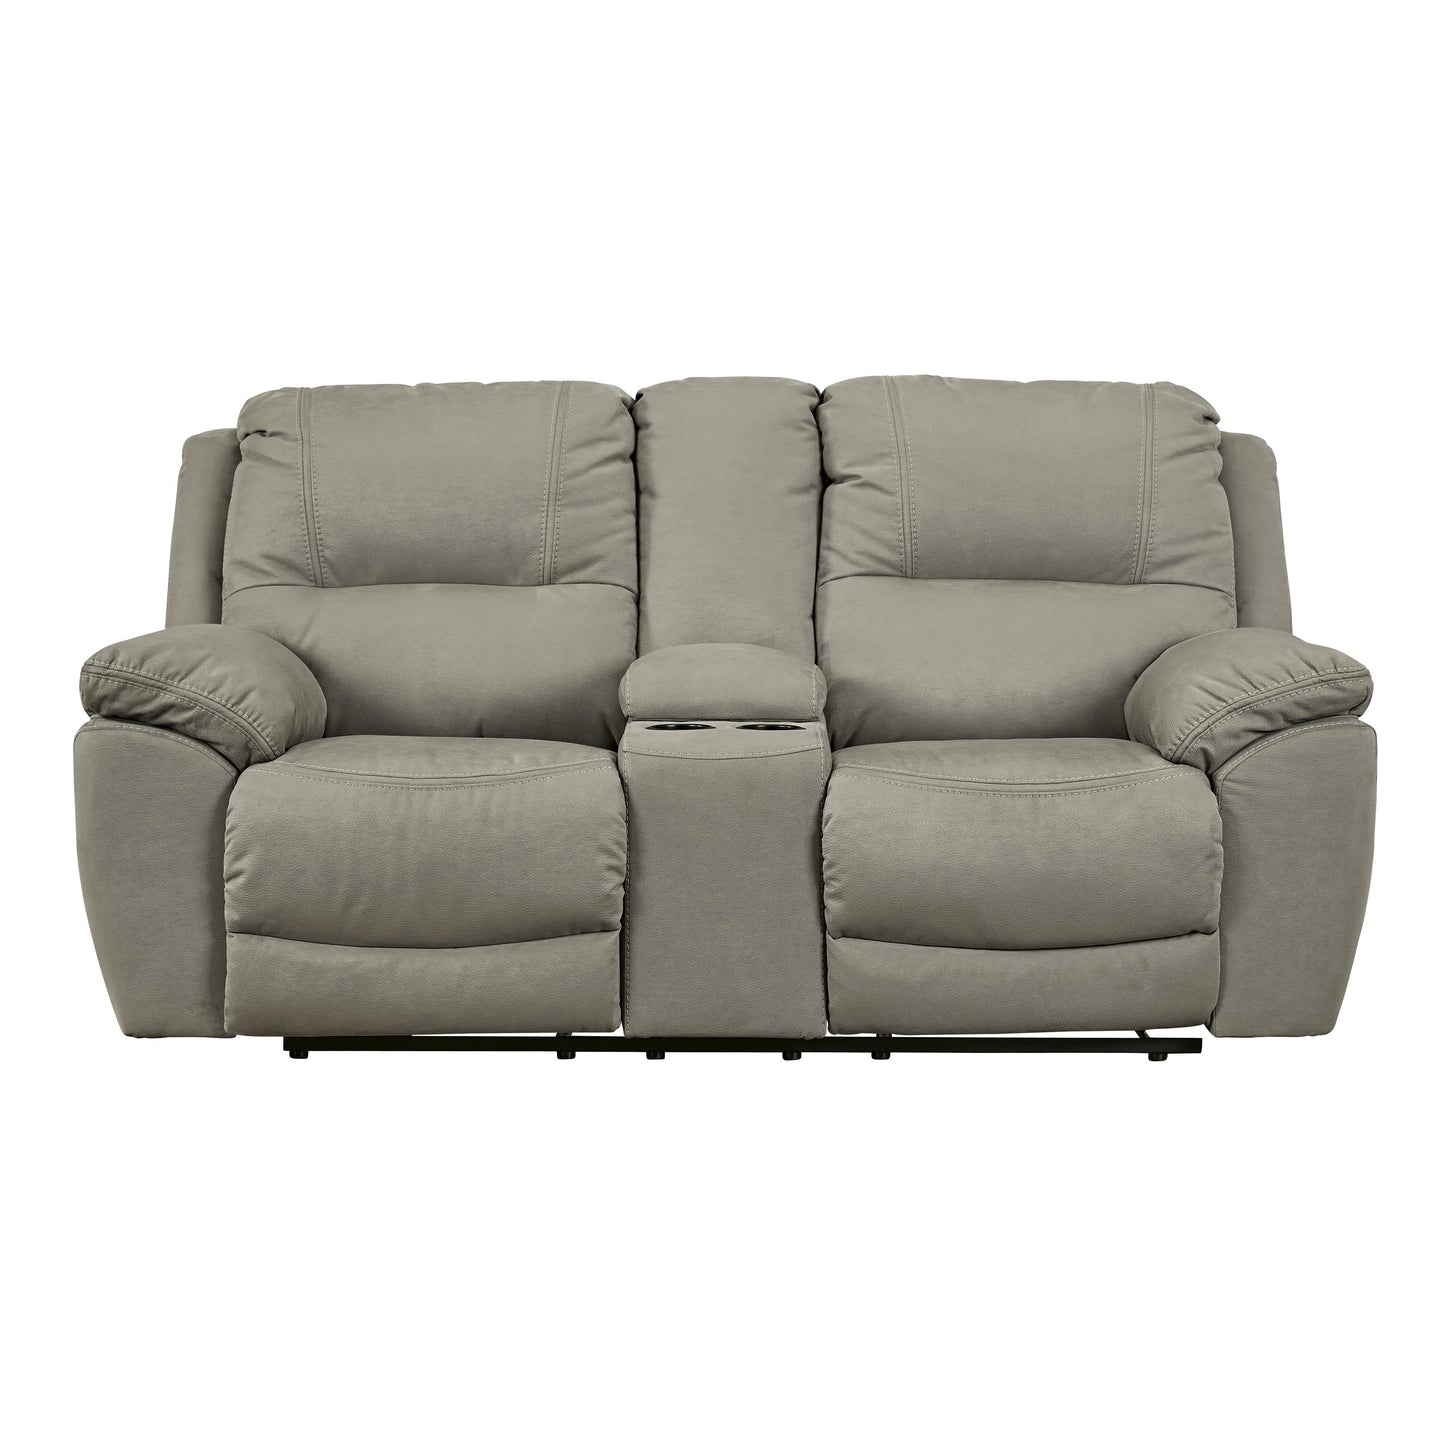 Signature Design by Ashley Next-Gen Gaucho Reclining Leather Look Loveseat 5420394 IMAGE 3